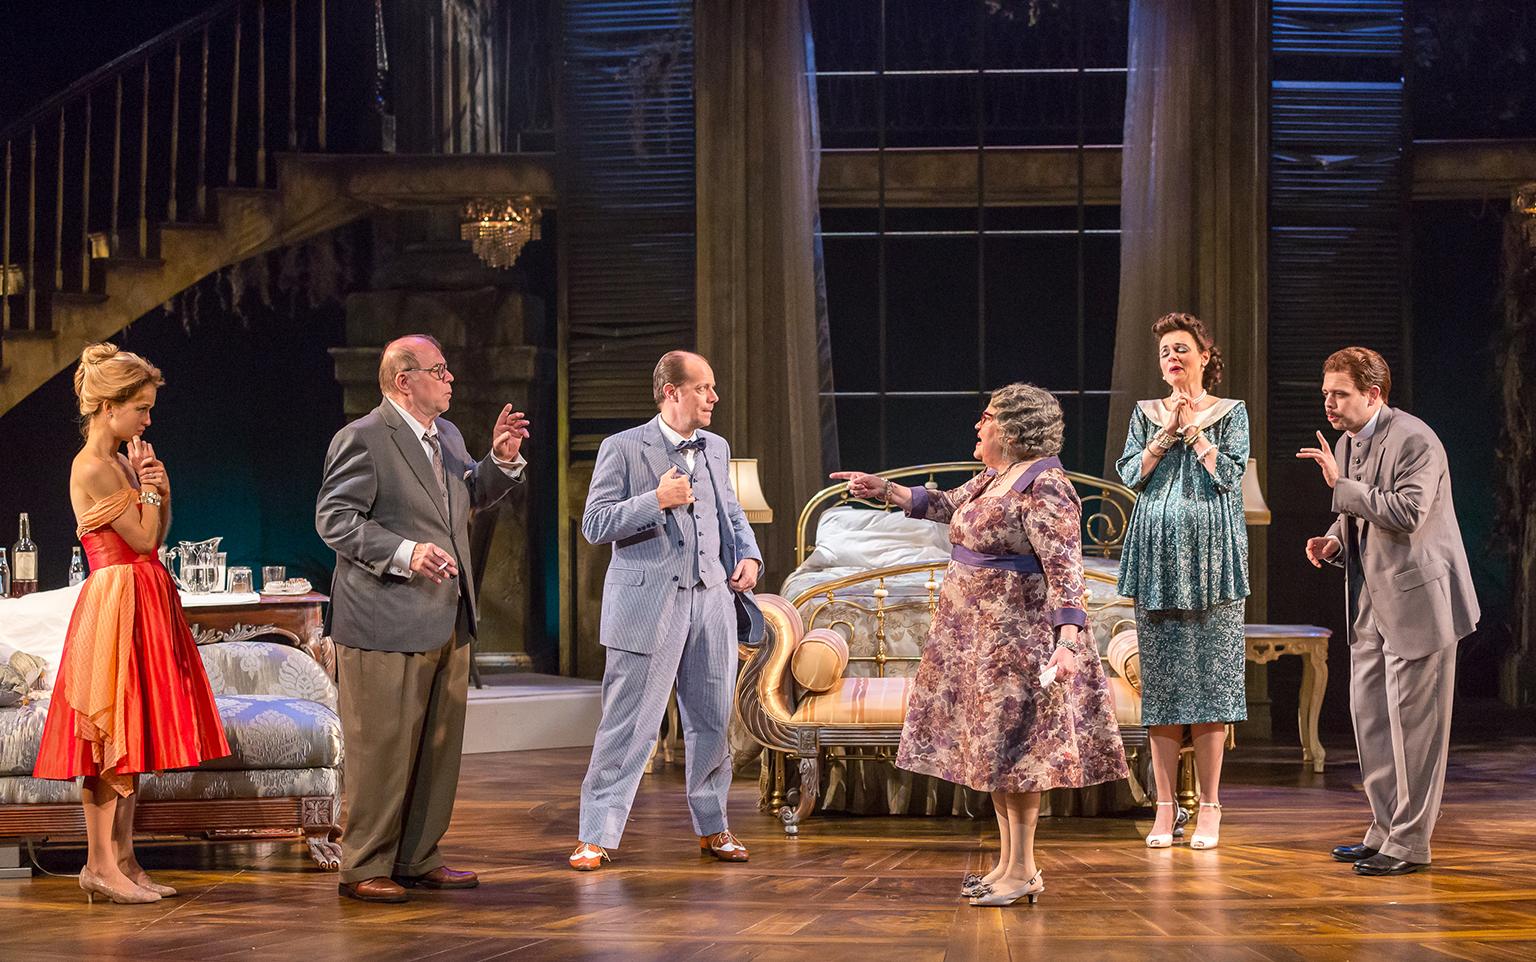 From left: Genevieve Angelson, Craig Spidle, Michael Milligan, Cindy Gold, Gail Rastorfer and Joe Bianco in “Cat on a Hot Tin Roof.” (Credit: Brett Beiner Photograpahy)